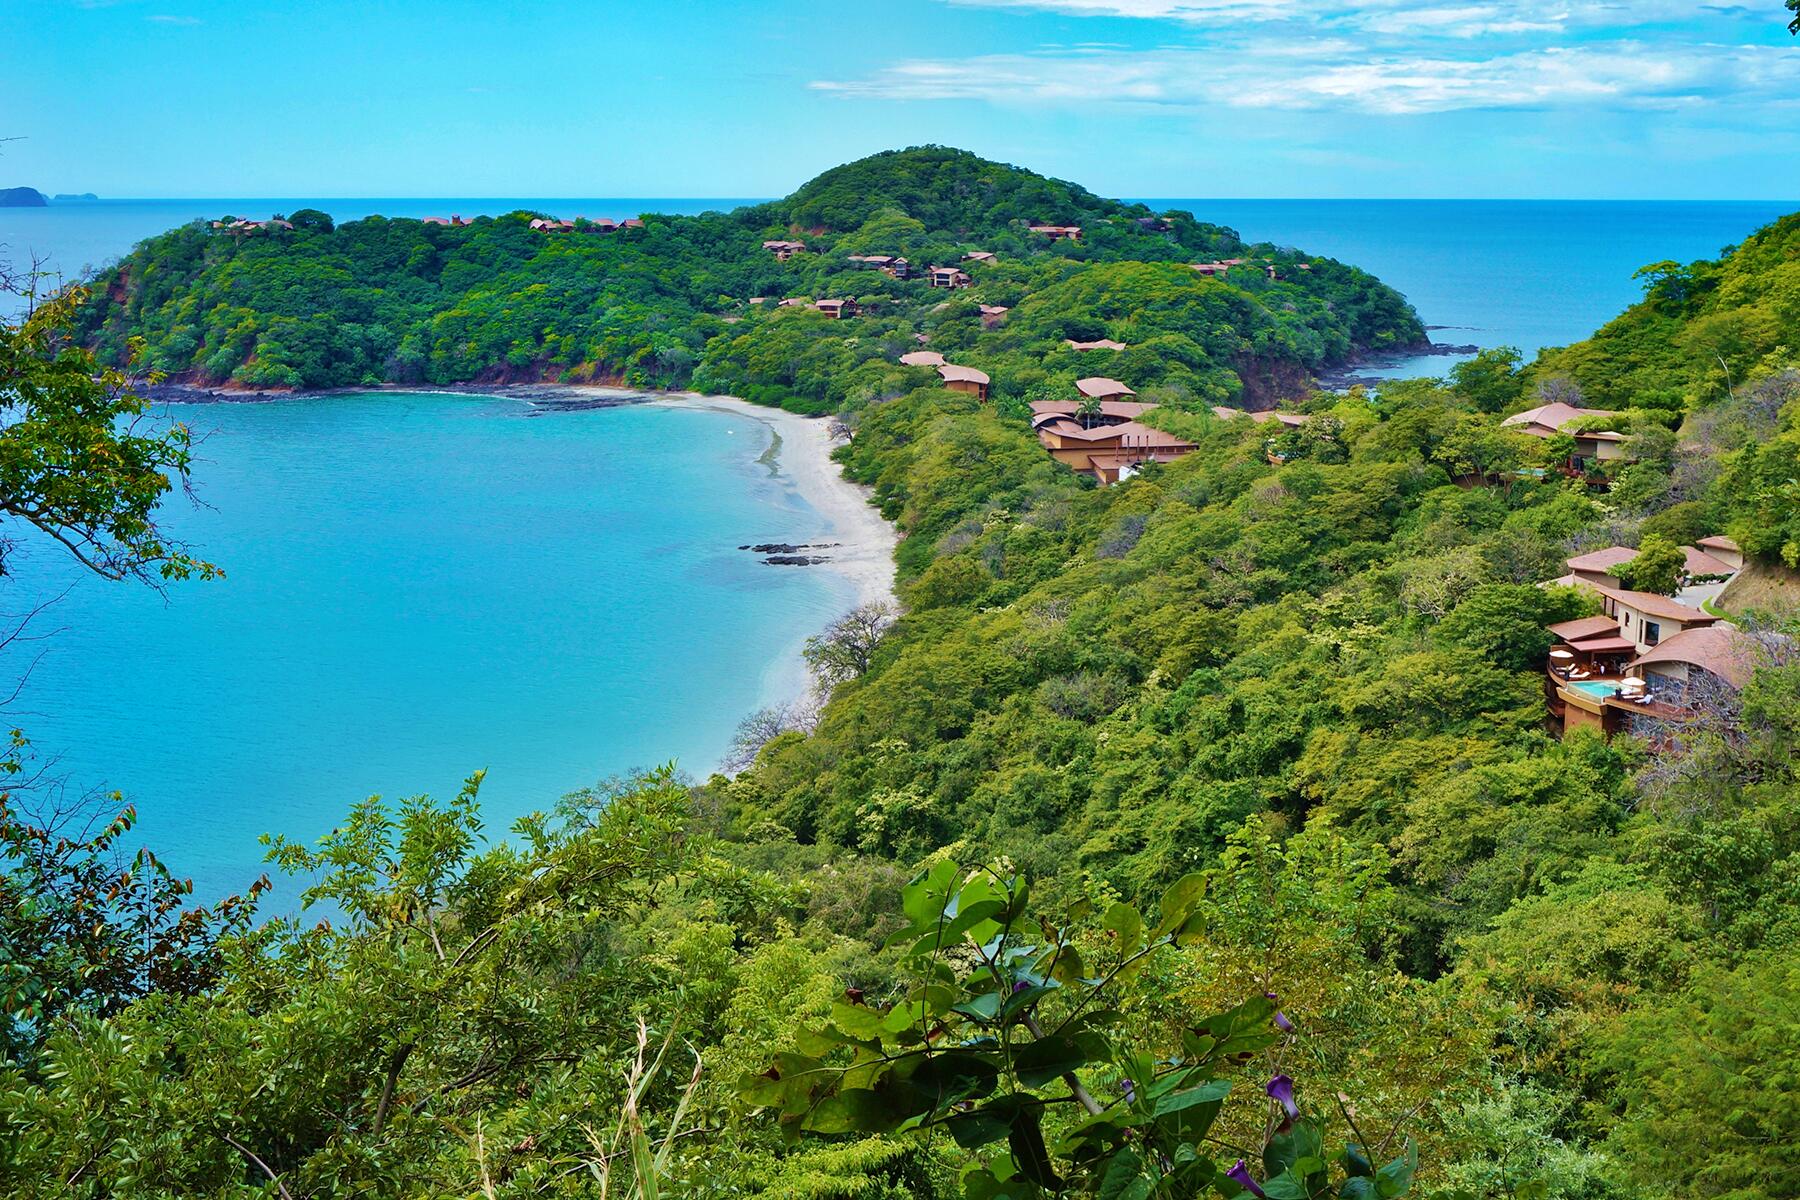 <a href='https://www.fodors.com/world/mexico-and-central-america/costa-rica/experiences/news/photos/ultimate-things-to-do-in-costa-rica#'>From &quot;30 Ultimate Things to Do in Costa Rica: Embrace the Pura Vida of the Pacific Coast&quot;</a>